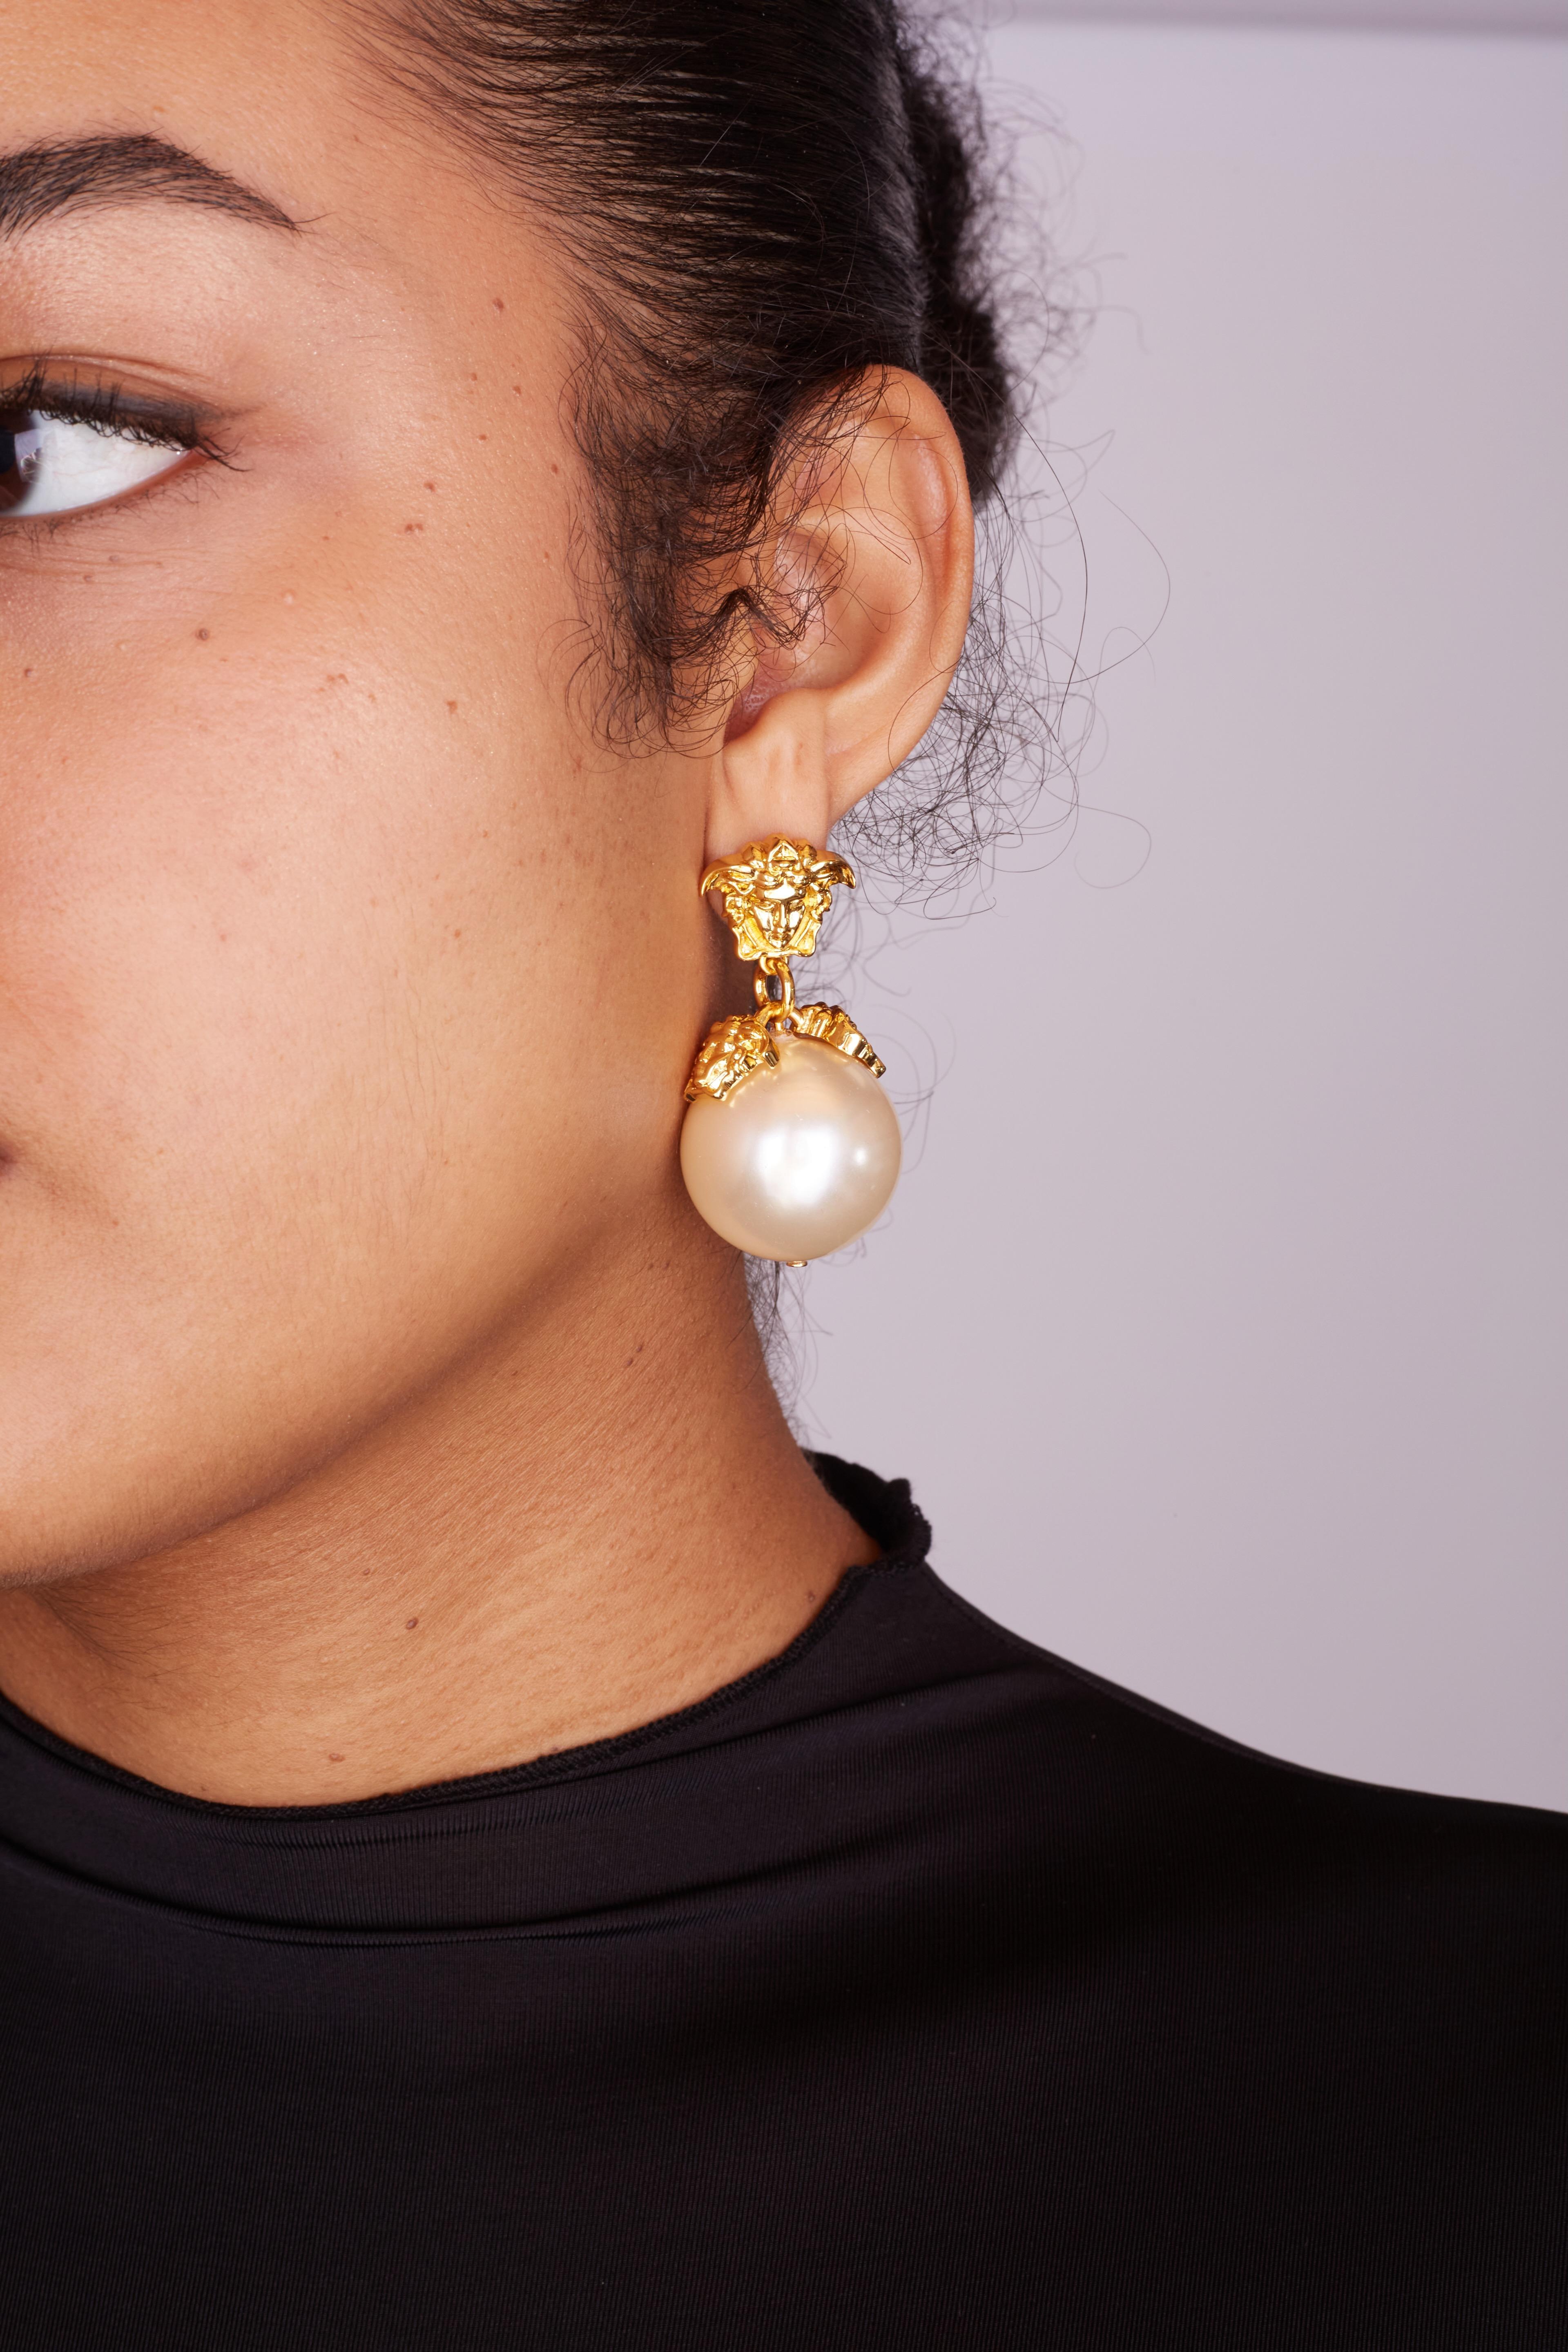 VERSACE MEDUSA FAUX PEARL DROP EARRINGS METALLIC

These classic Versace earrings are made of faux pearls with gold tone metal They feature the brands signature medusa at top with a dangling lush white pearl. For pierced ears.

Color: Gold tone and